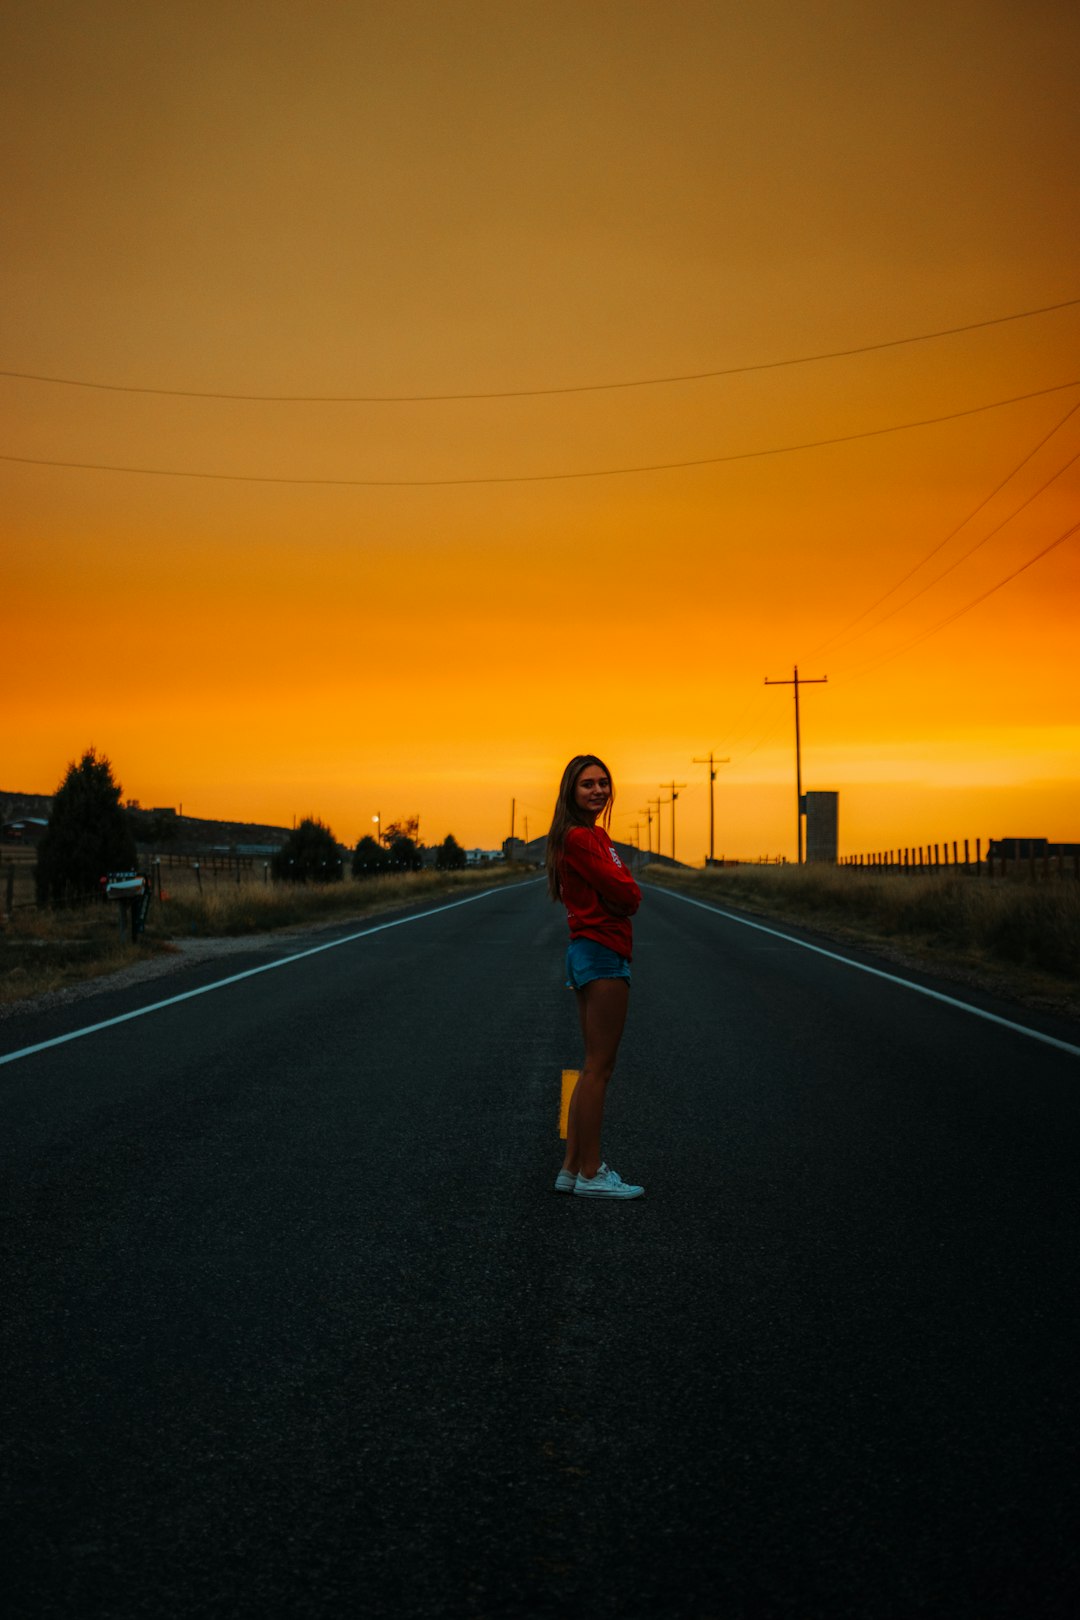 woman in red and blue plaid shirt standing on road during sunset